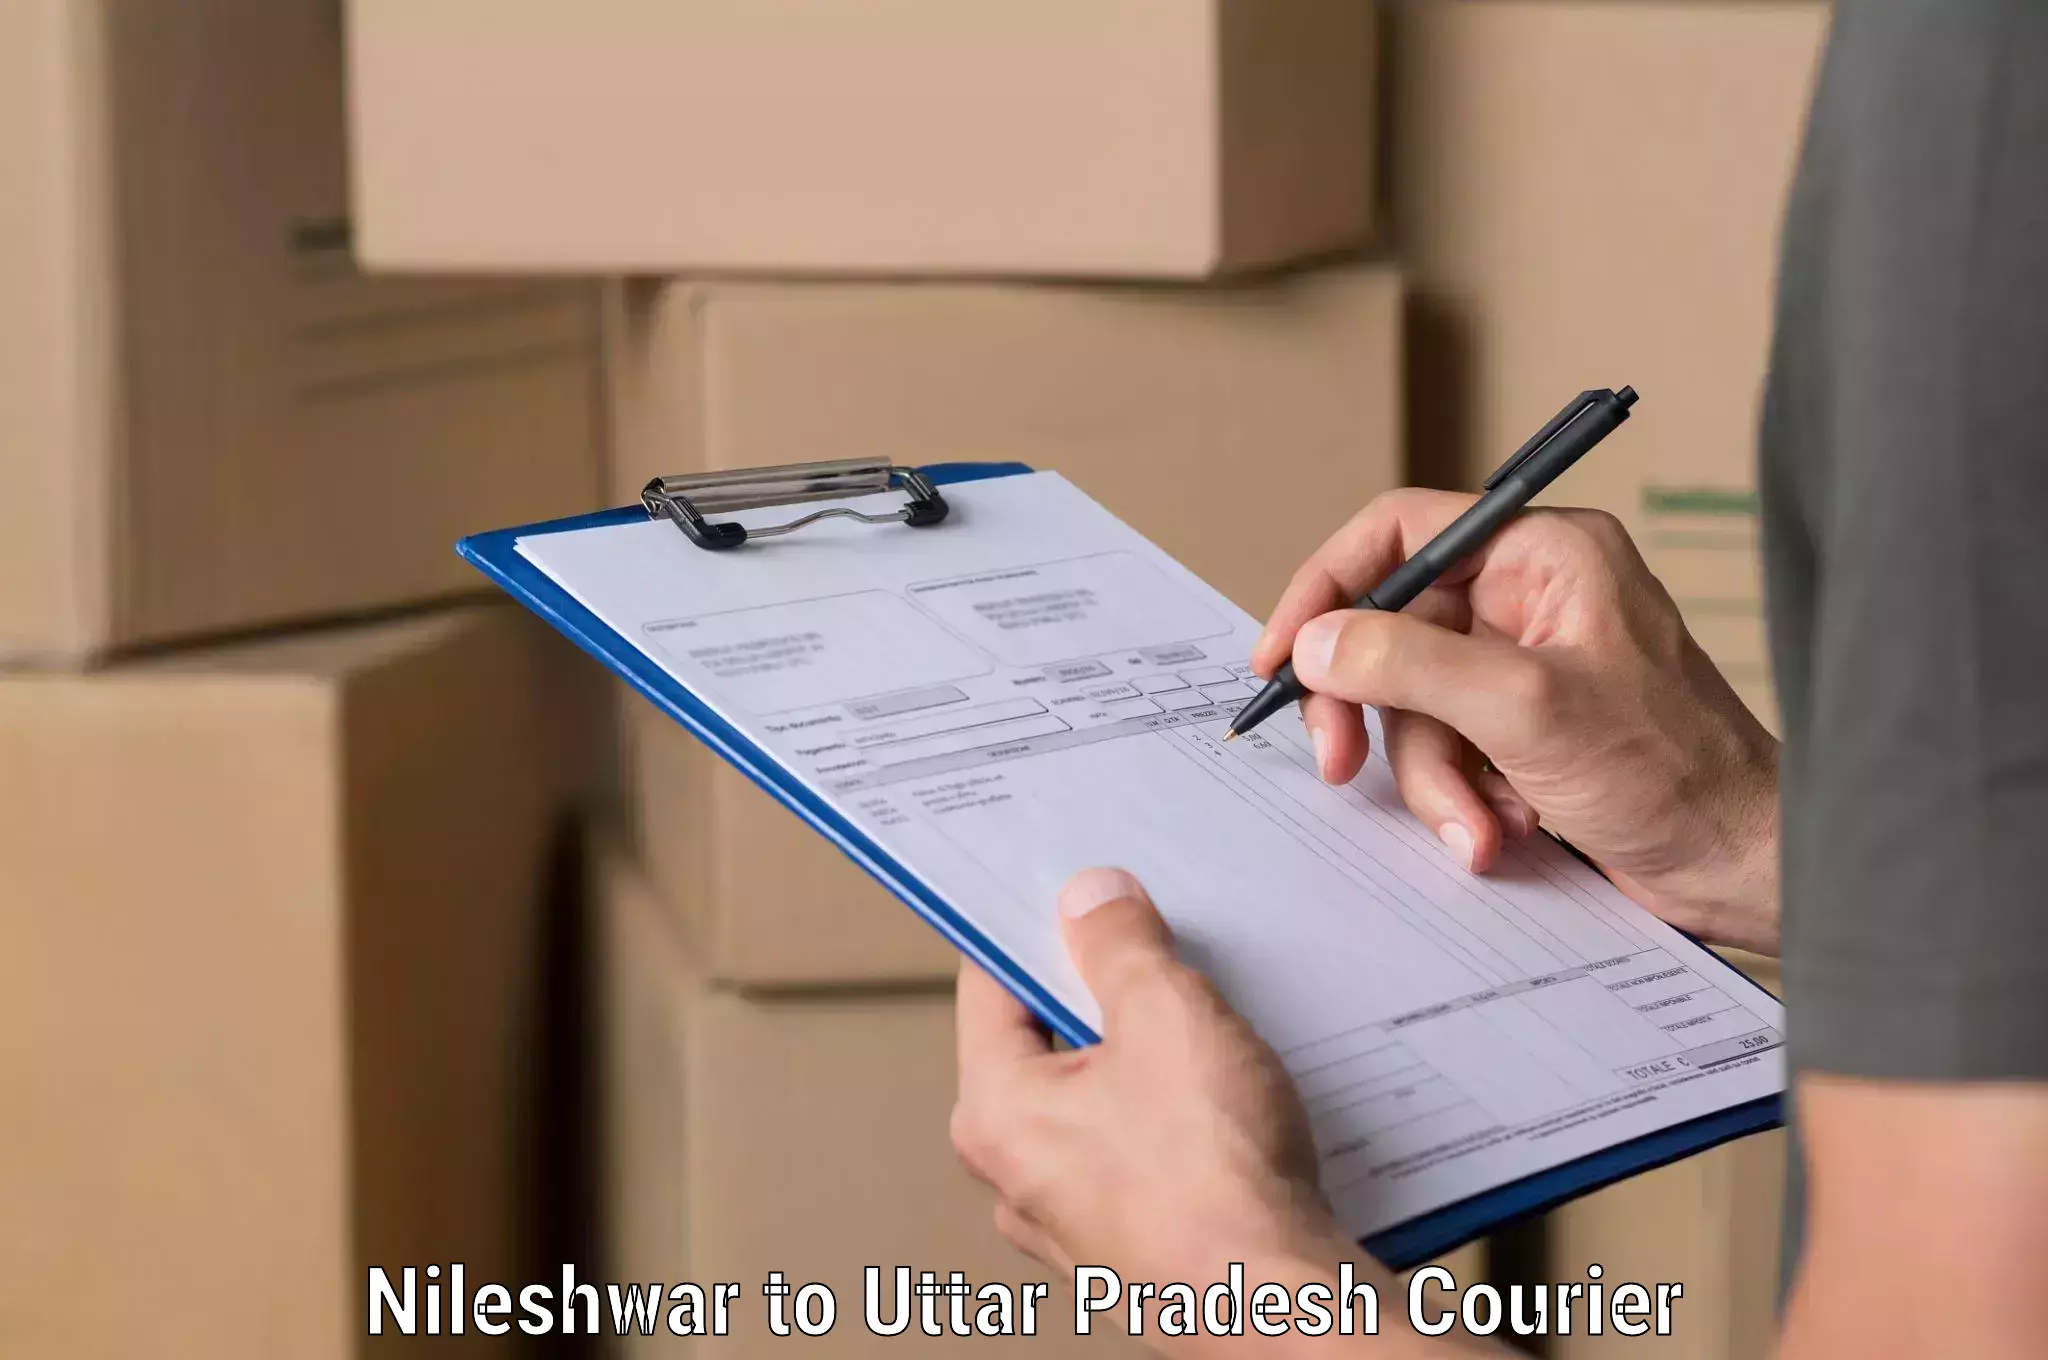 Corporate courier solutions Nileshwar to Kanpur